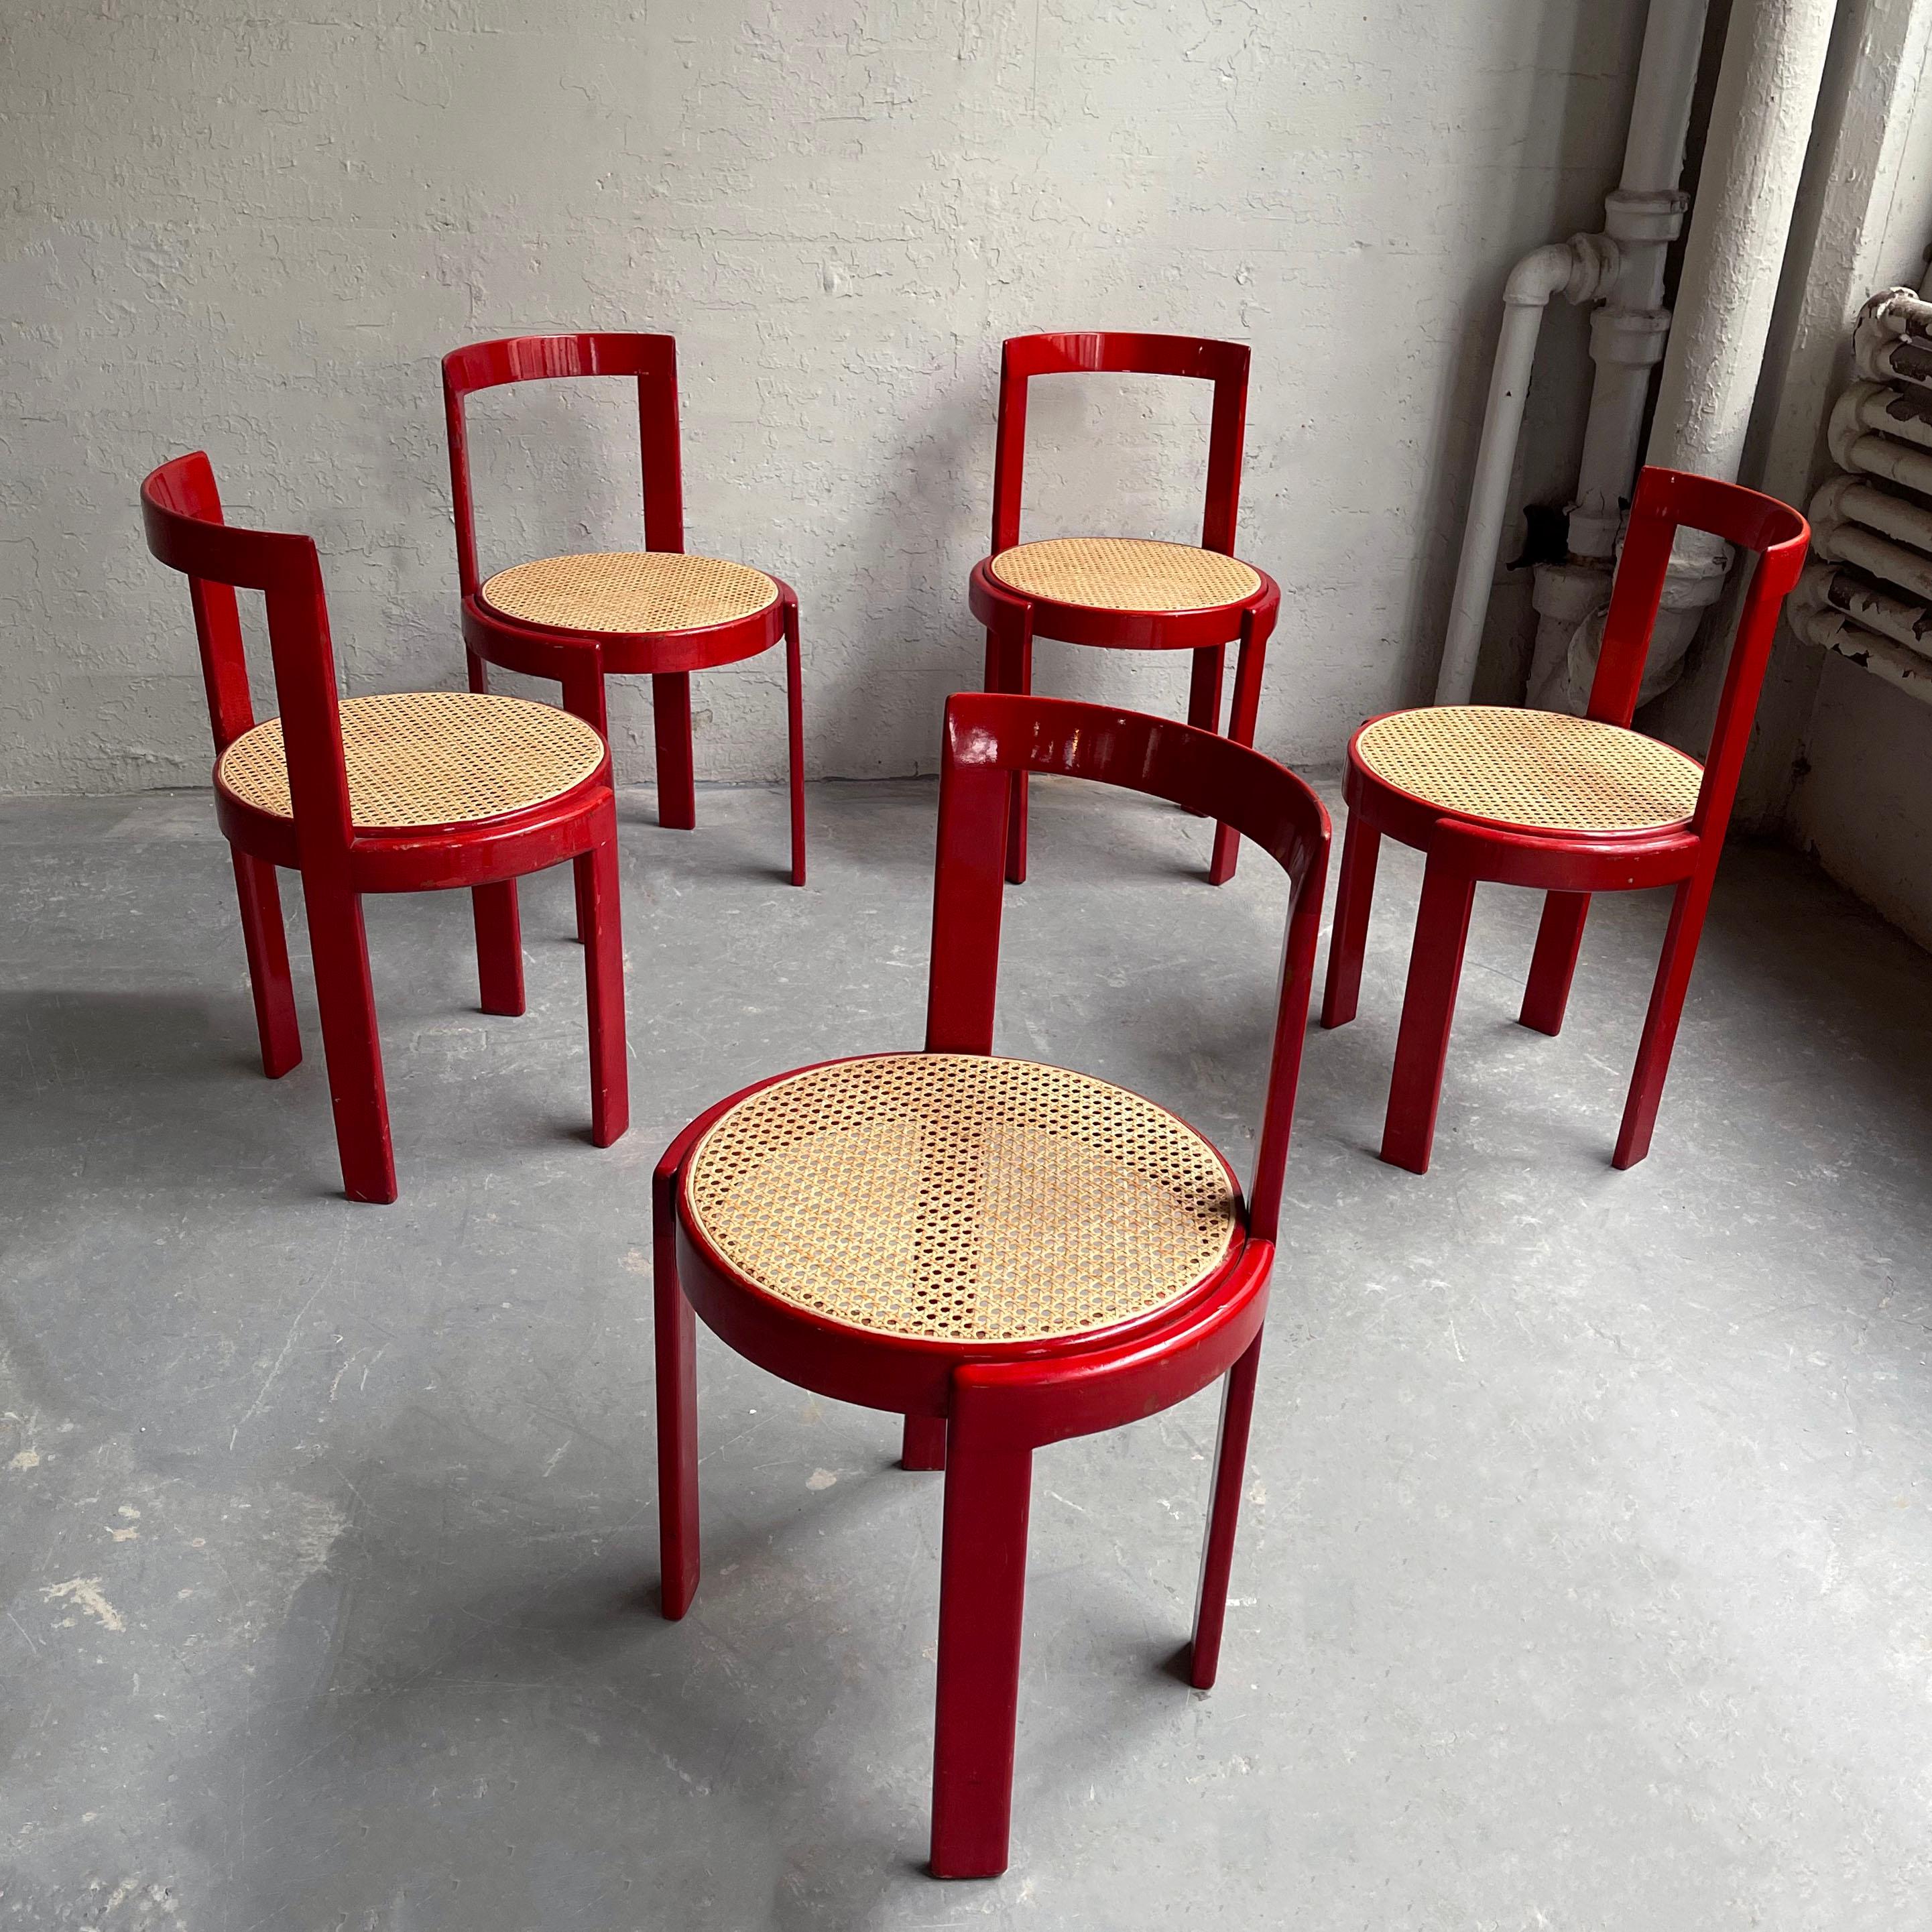 Italian Modernist Circular Bentwood And Cane Dining Chairs Set Of 6 For Sale 1